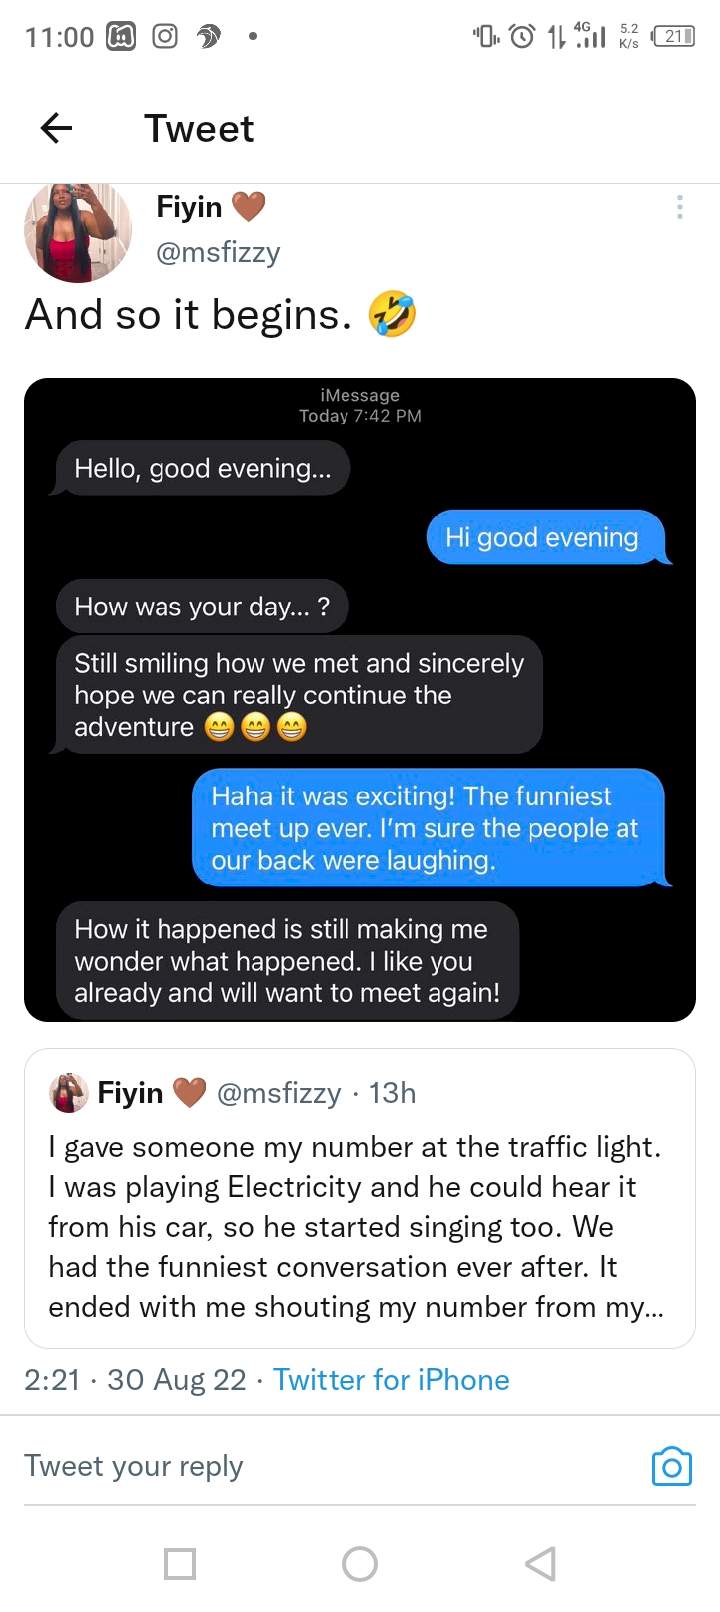 'I ended up shouting my number from my car' - Lady recounts hilarious but sweet way she met a man at traffic light